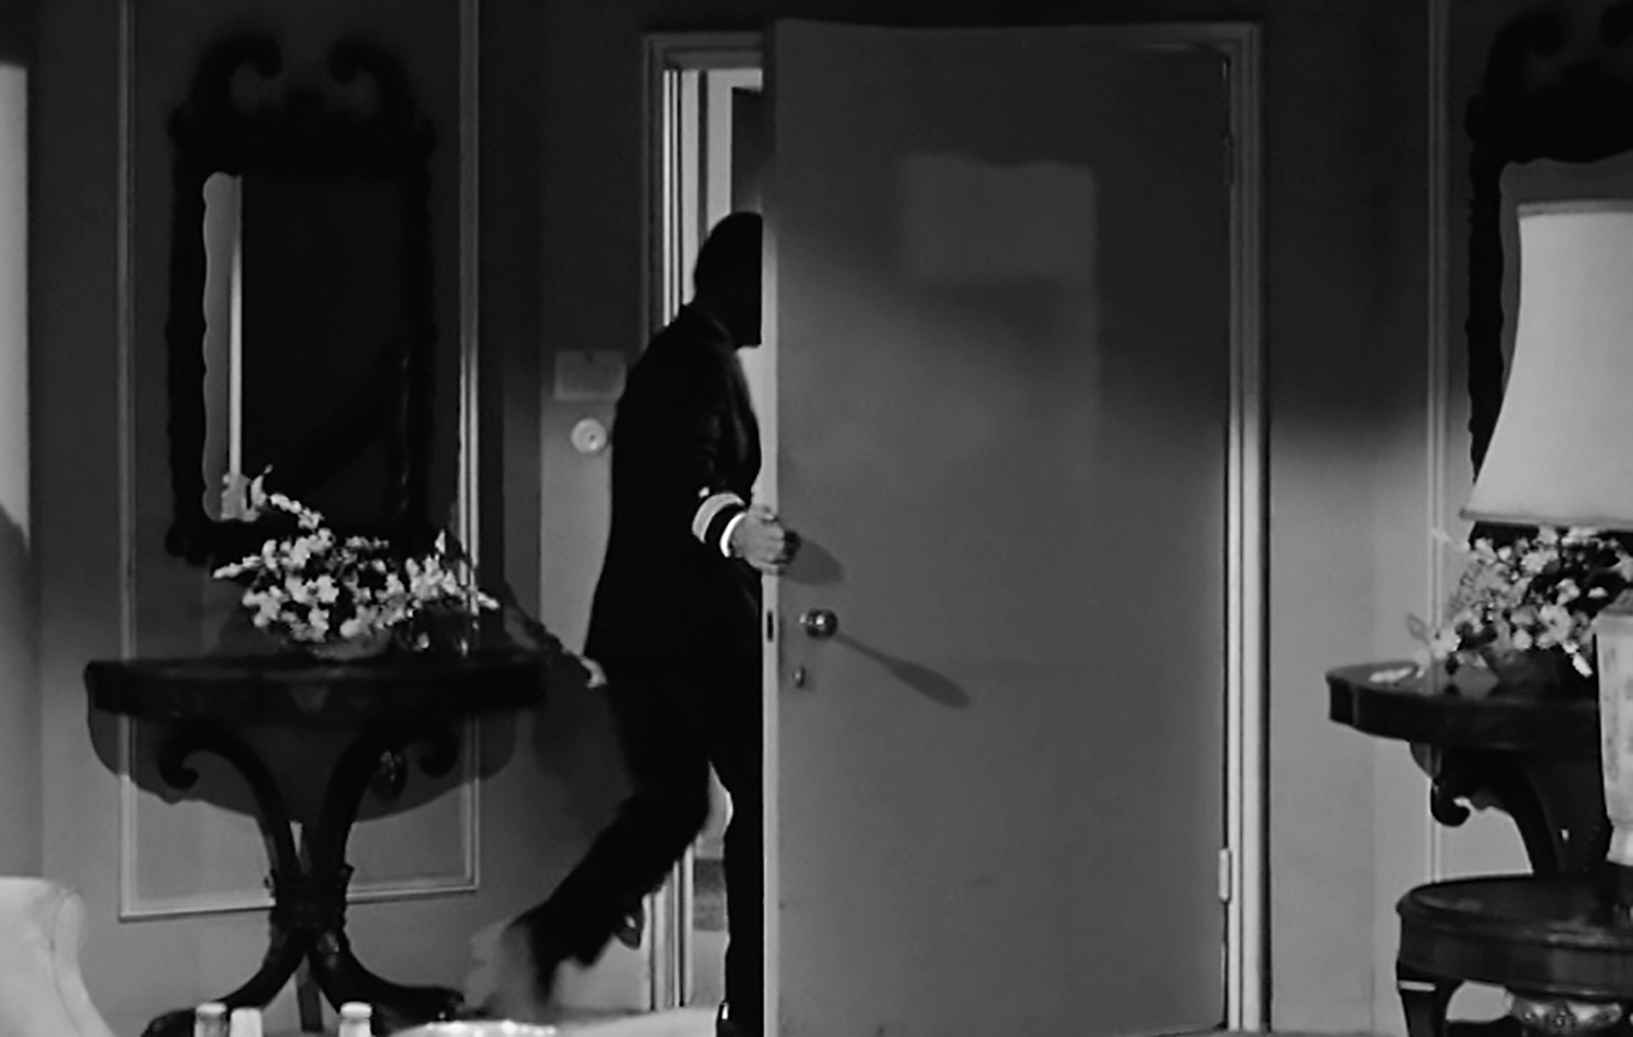 Black and white still of a figure exiting a room